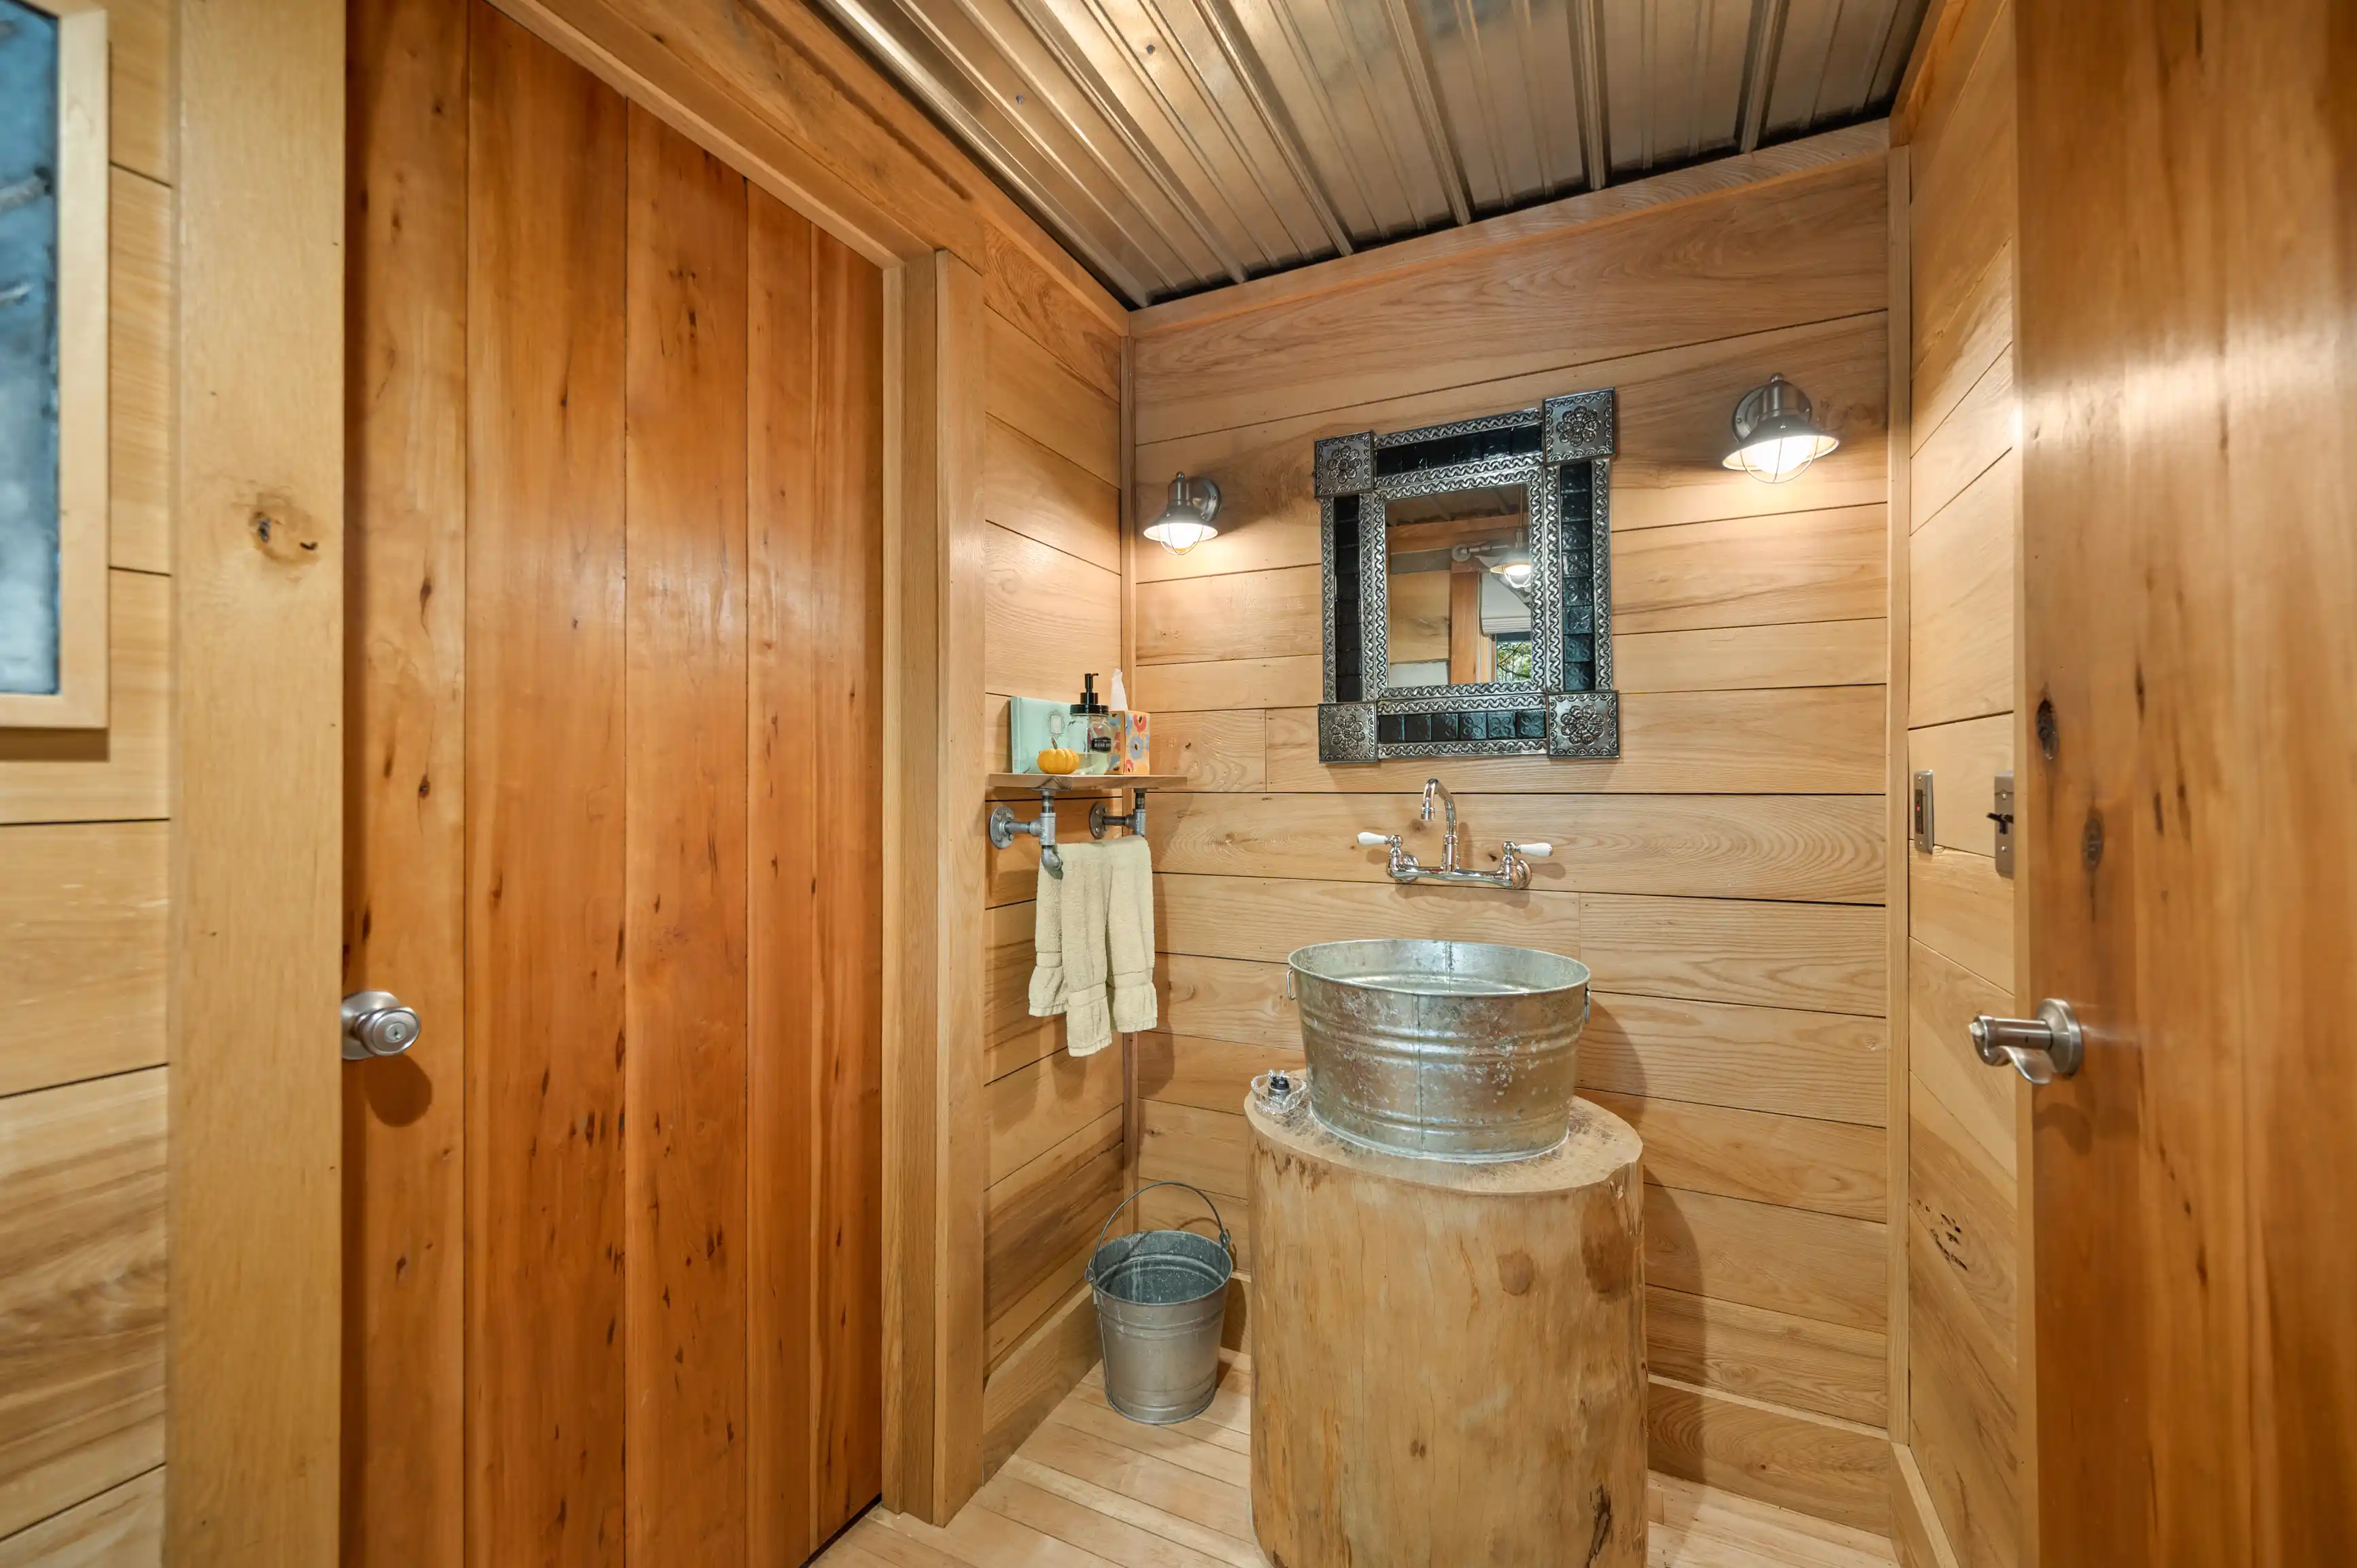 Rustic wooden bathroom interior featuring a galvanized bucket sink on a natural wood stump, wall-mounted faucet, framed mirror, and wood-paneled walls.